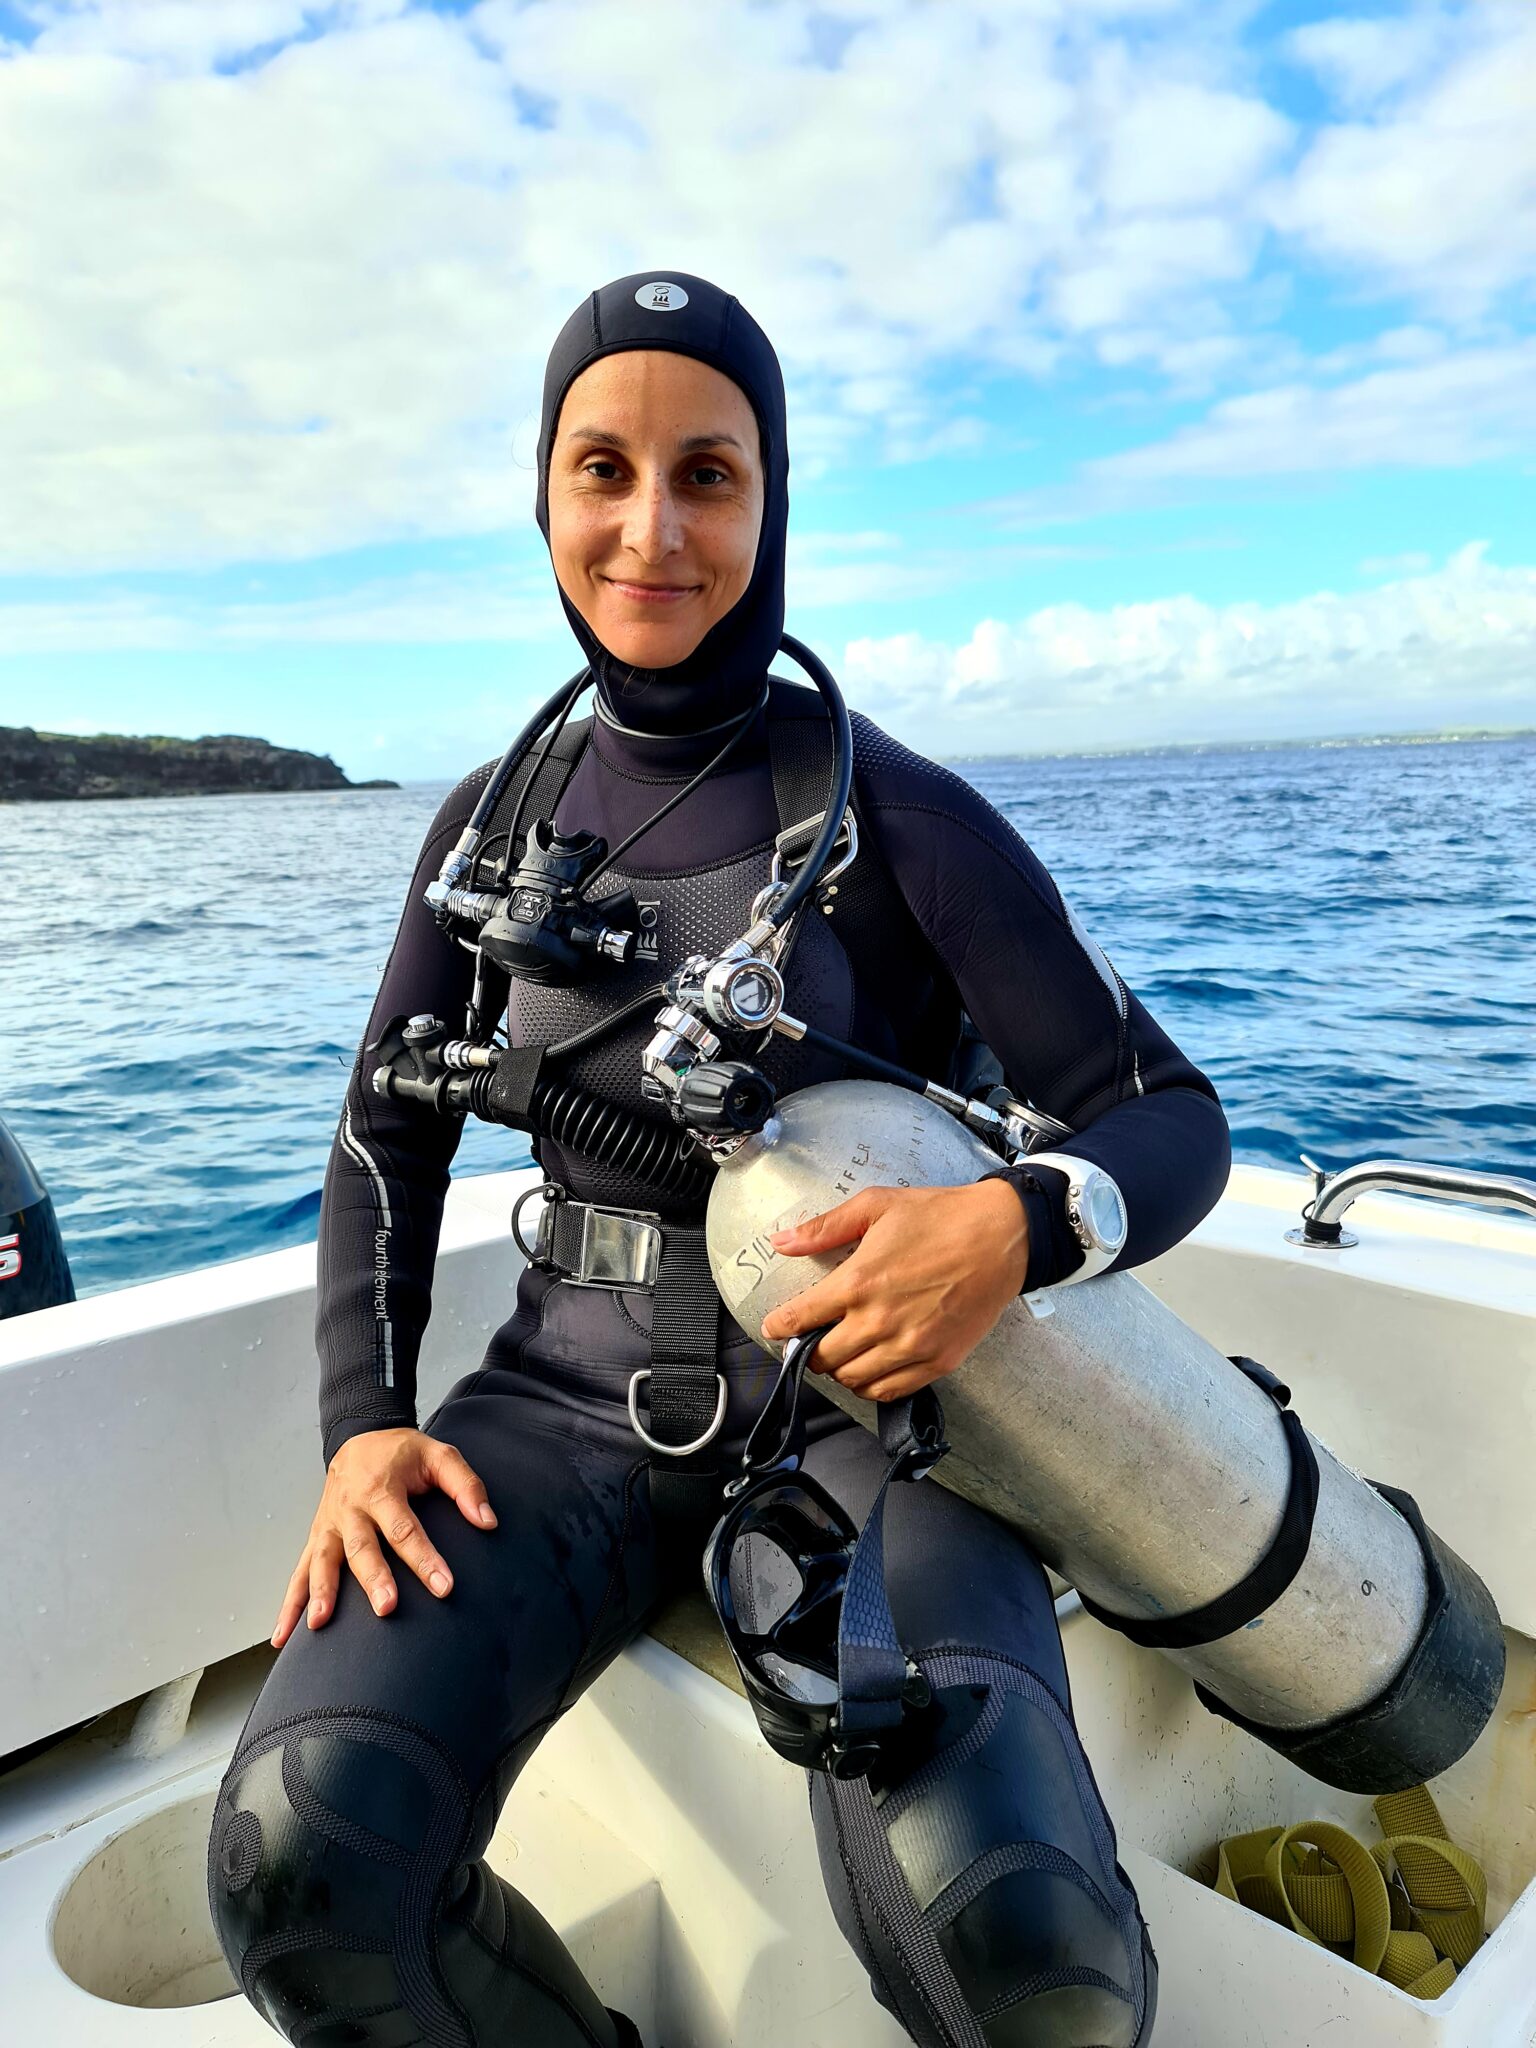 A female diver sits on the bow of a boat, smiling as she waits to go underwater.